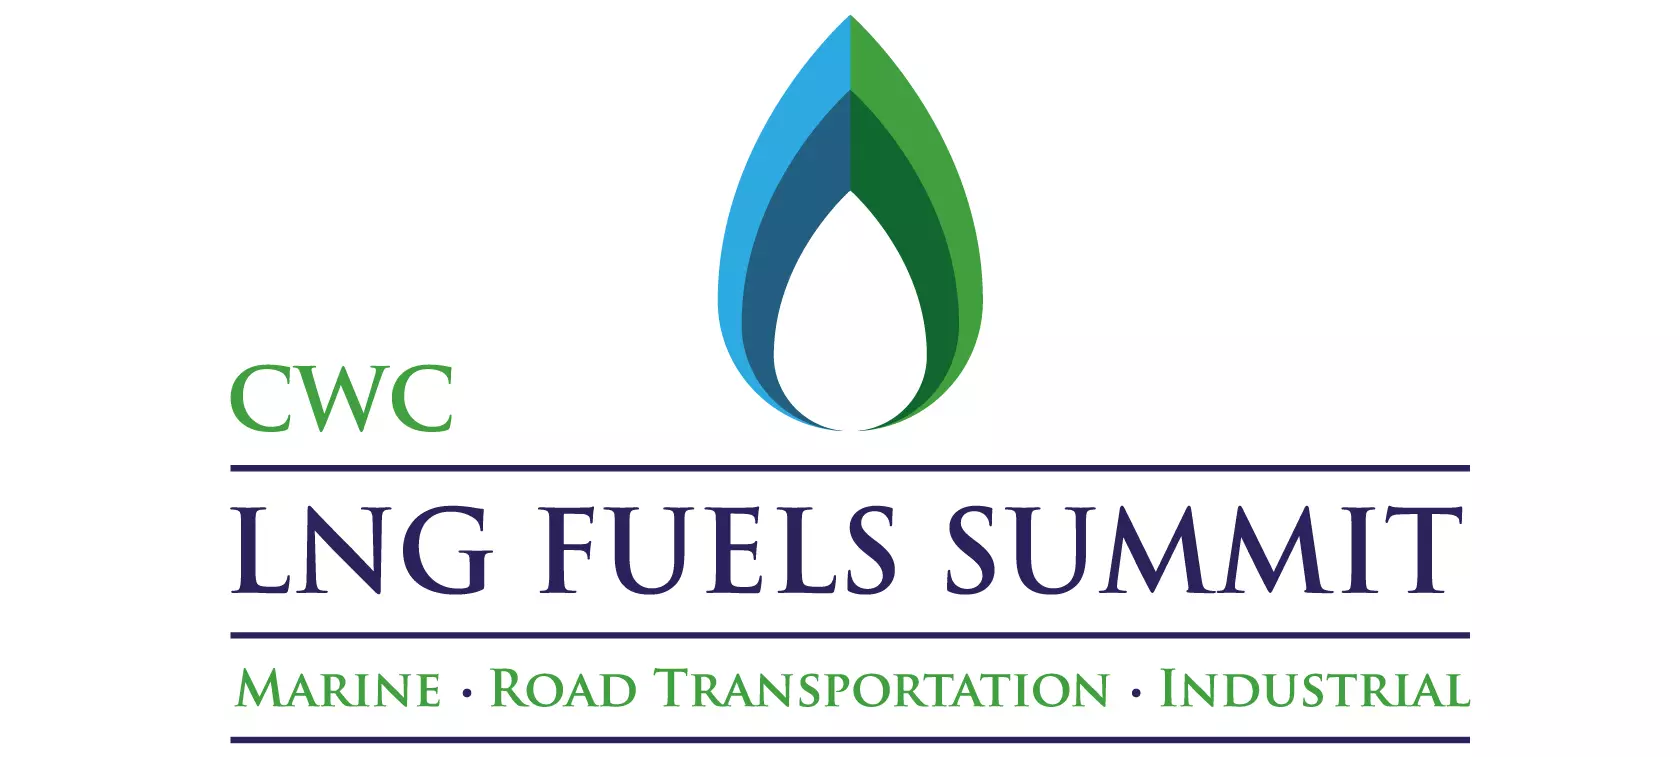 Programme for CWC LNG Fuels Summit Announced